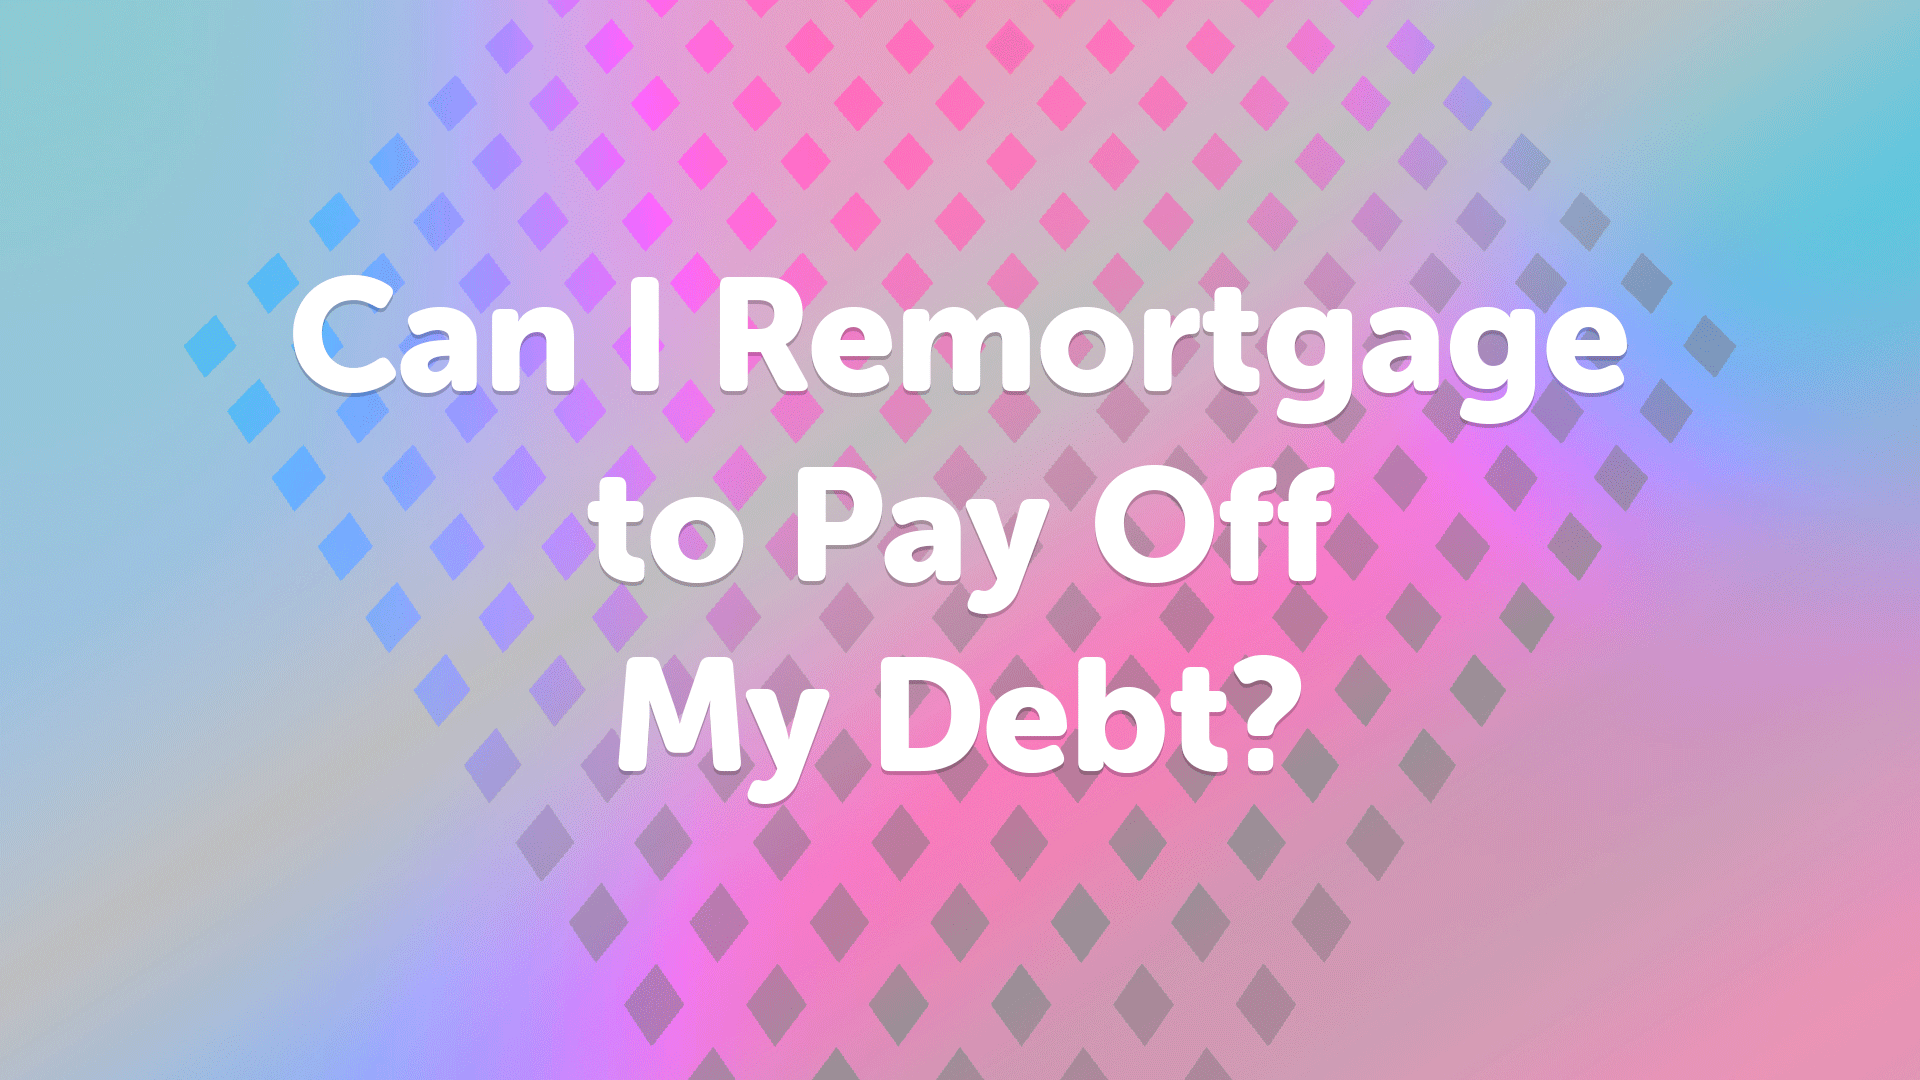 Can I remortgage to pay off my debt? | UK Moneyman Mortgage Broker